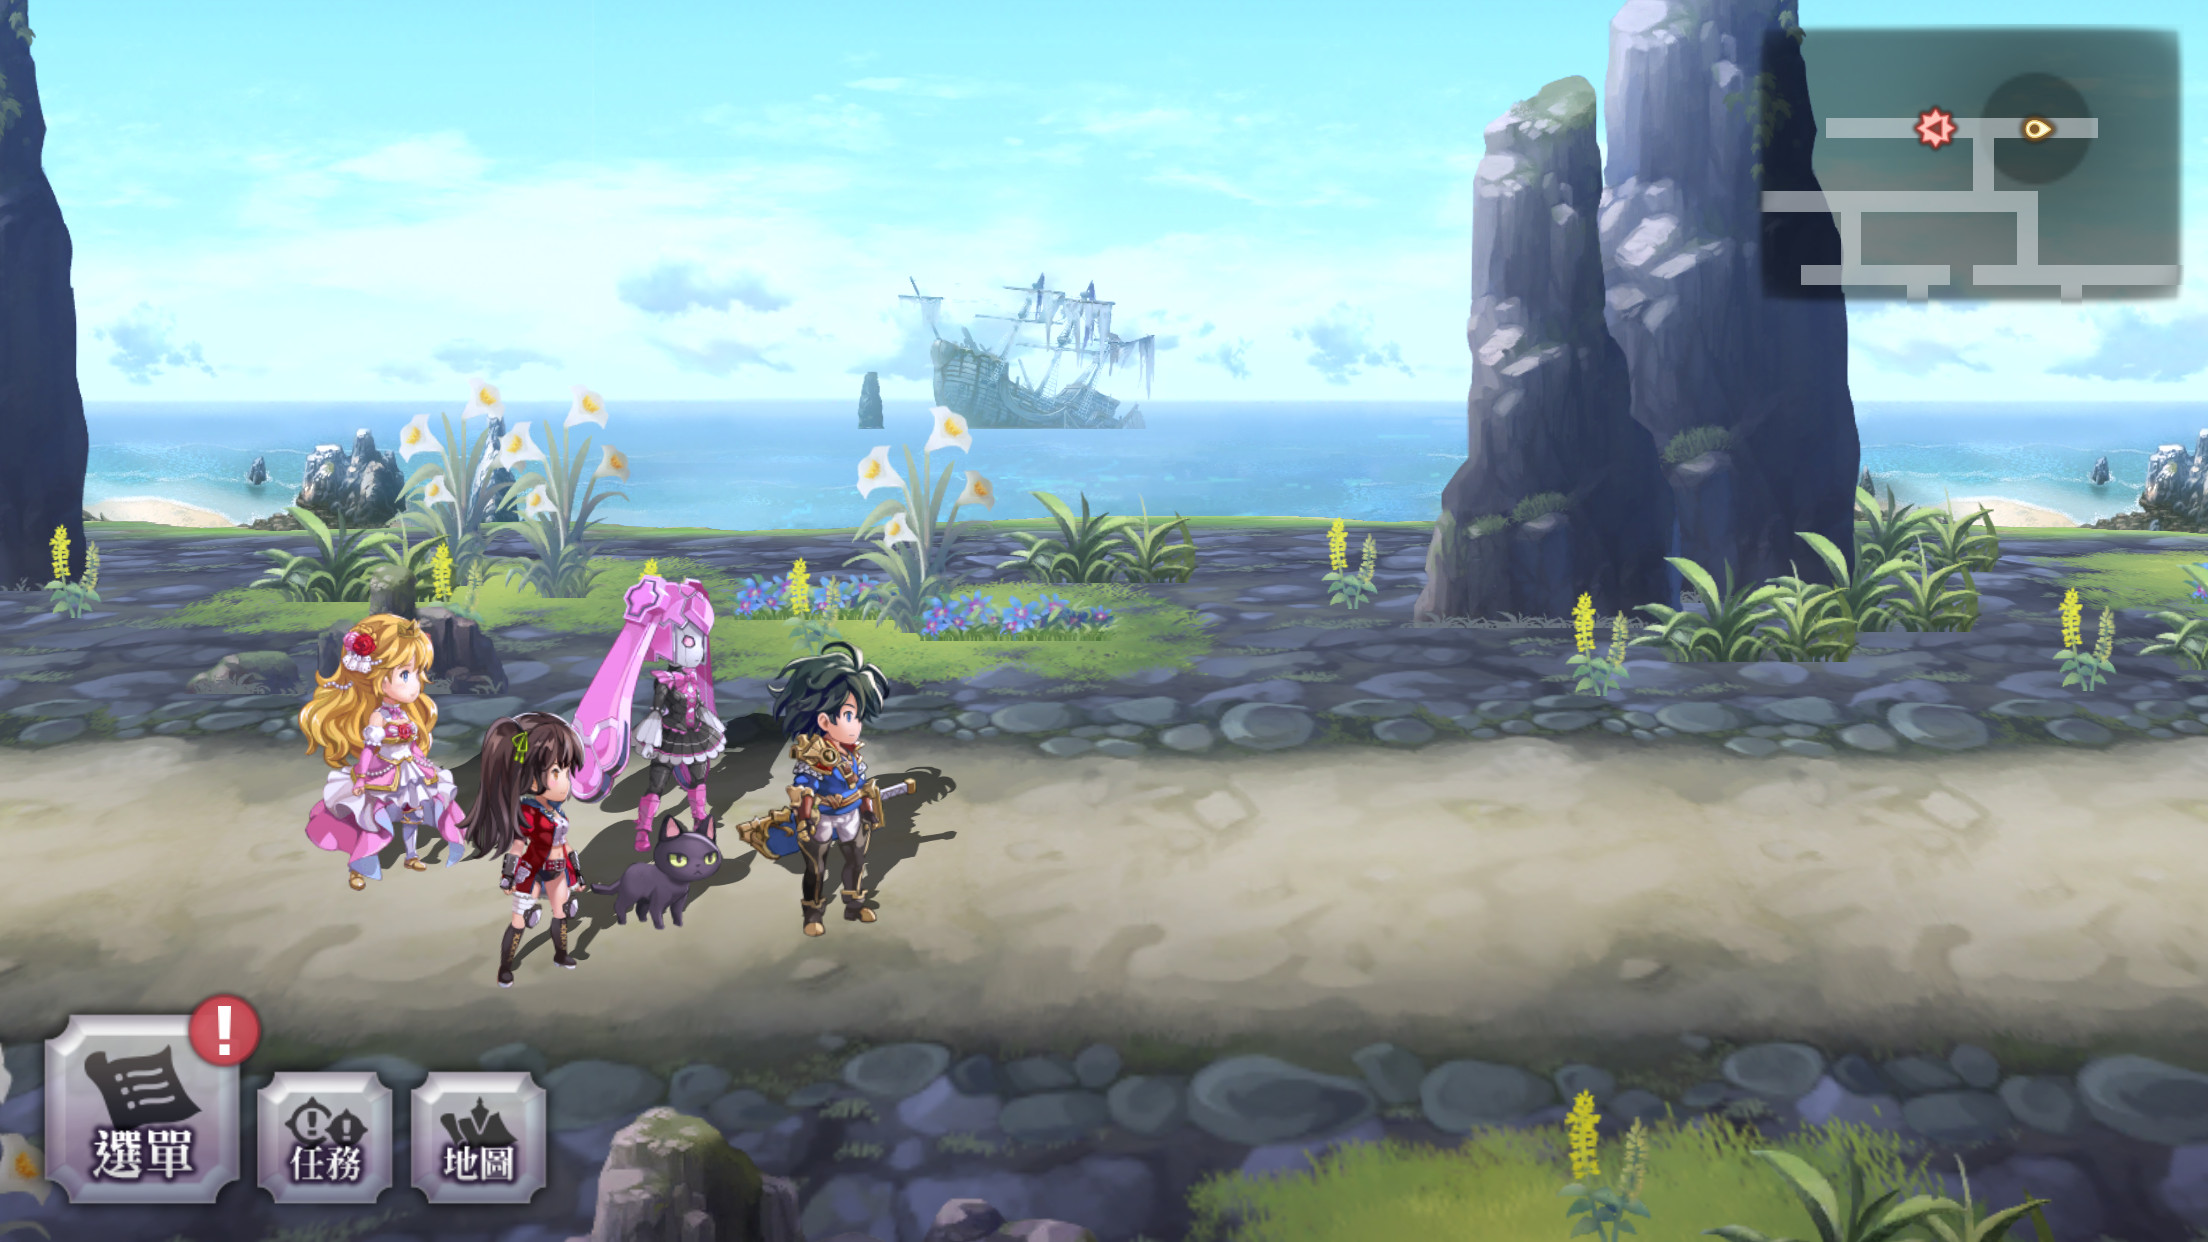 ▲▼《Another Eden：穿越時空的貓》。圖／翻攝自《Another Eden：穿越時空的貓》遊戲畫面。）